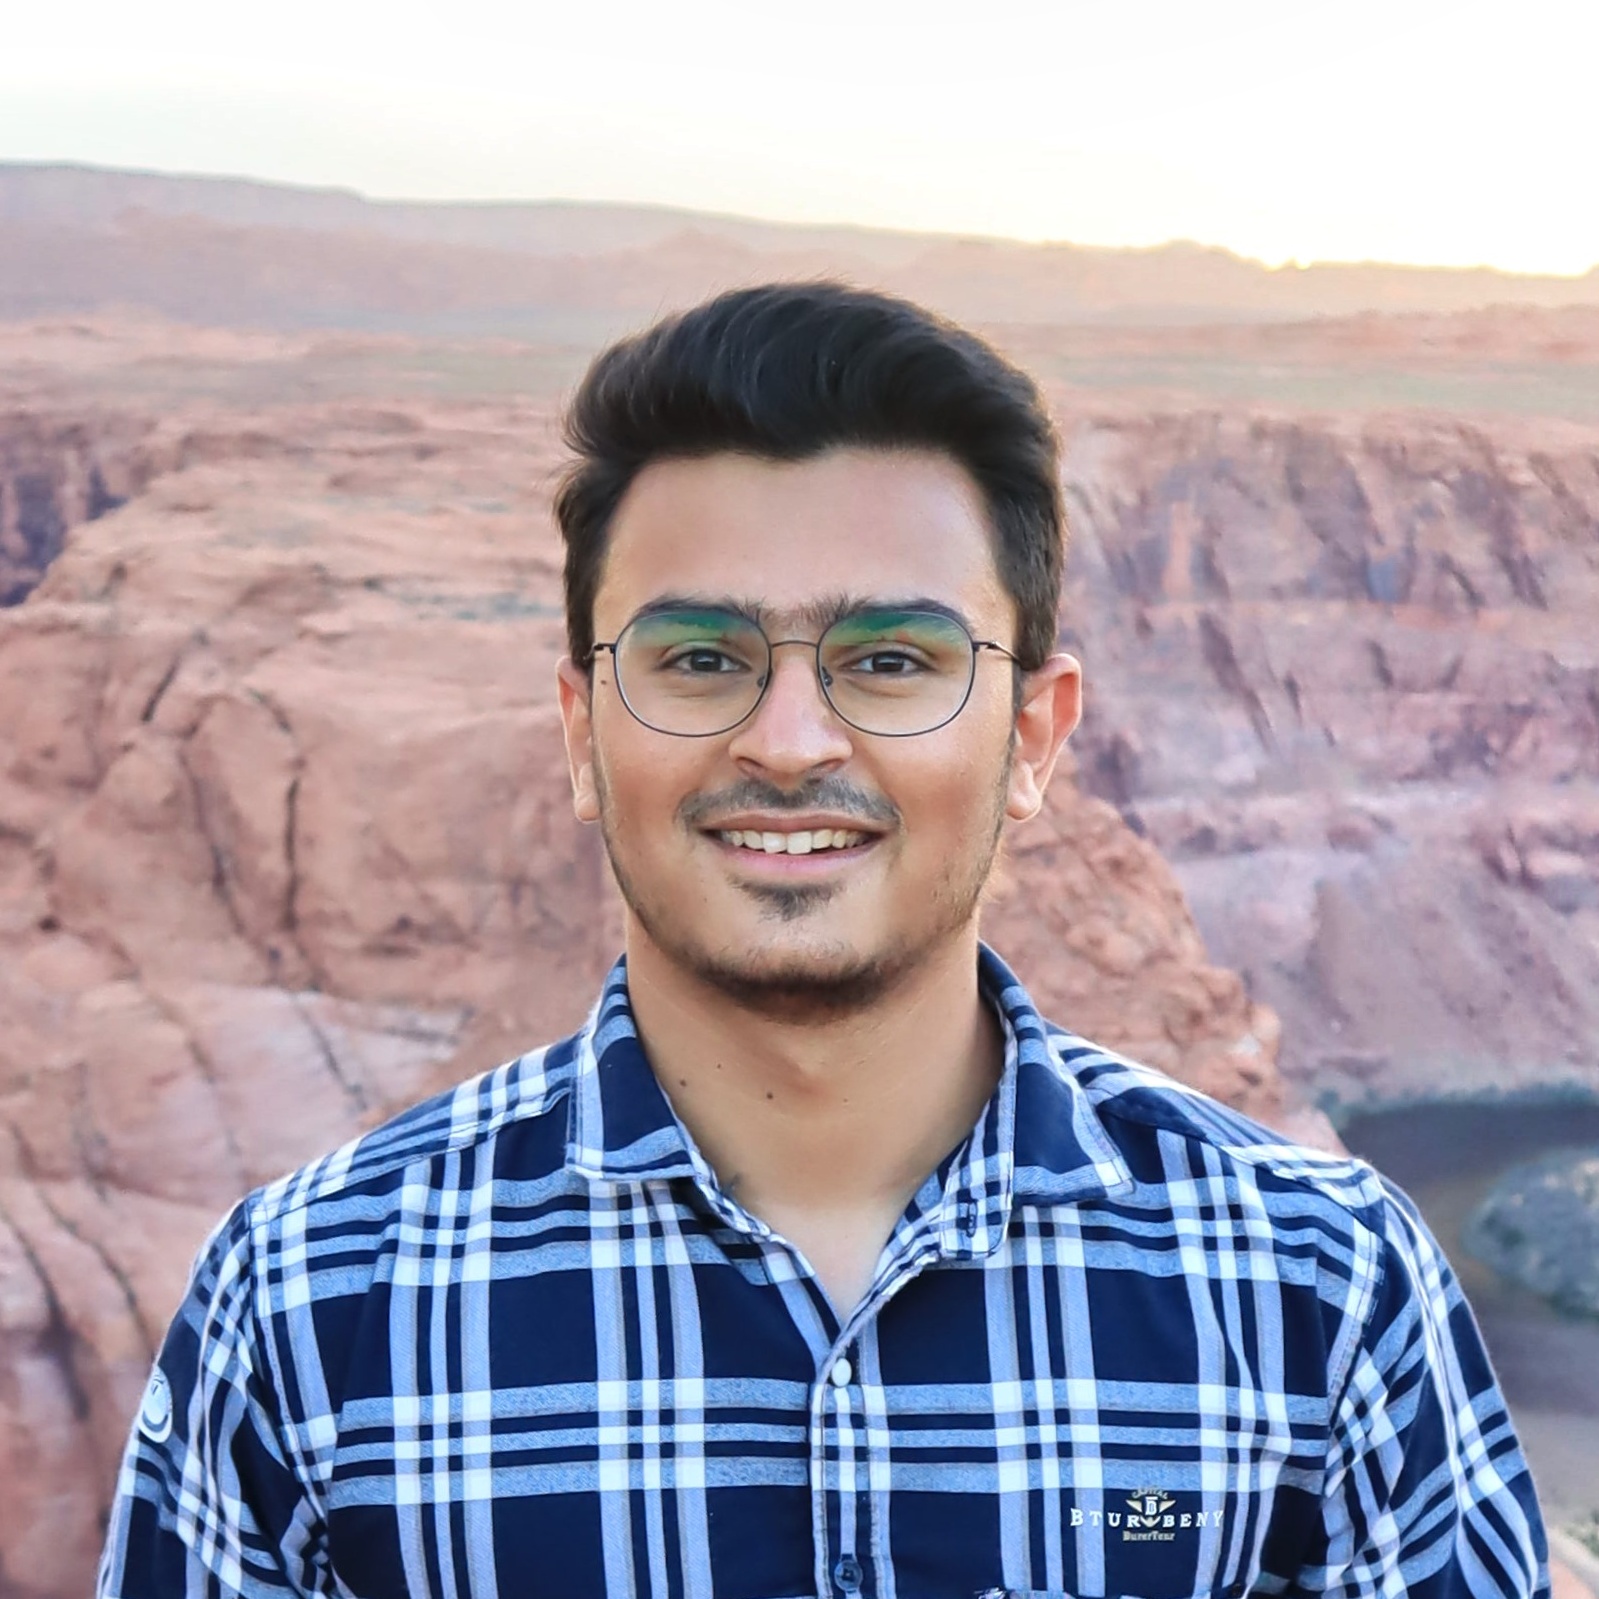 Portrait of a student in front of red rocks